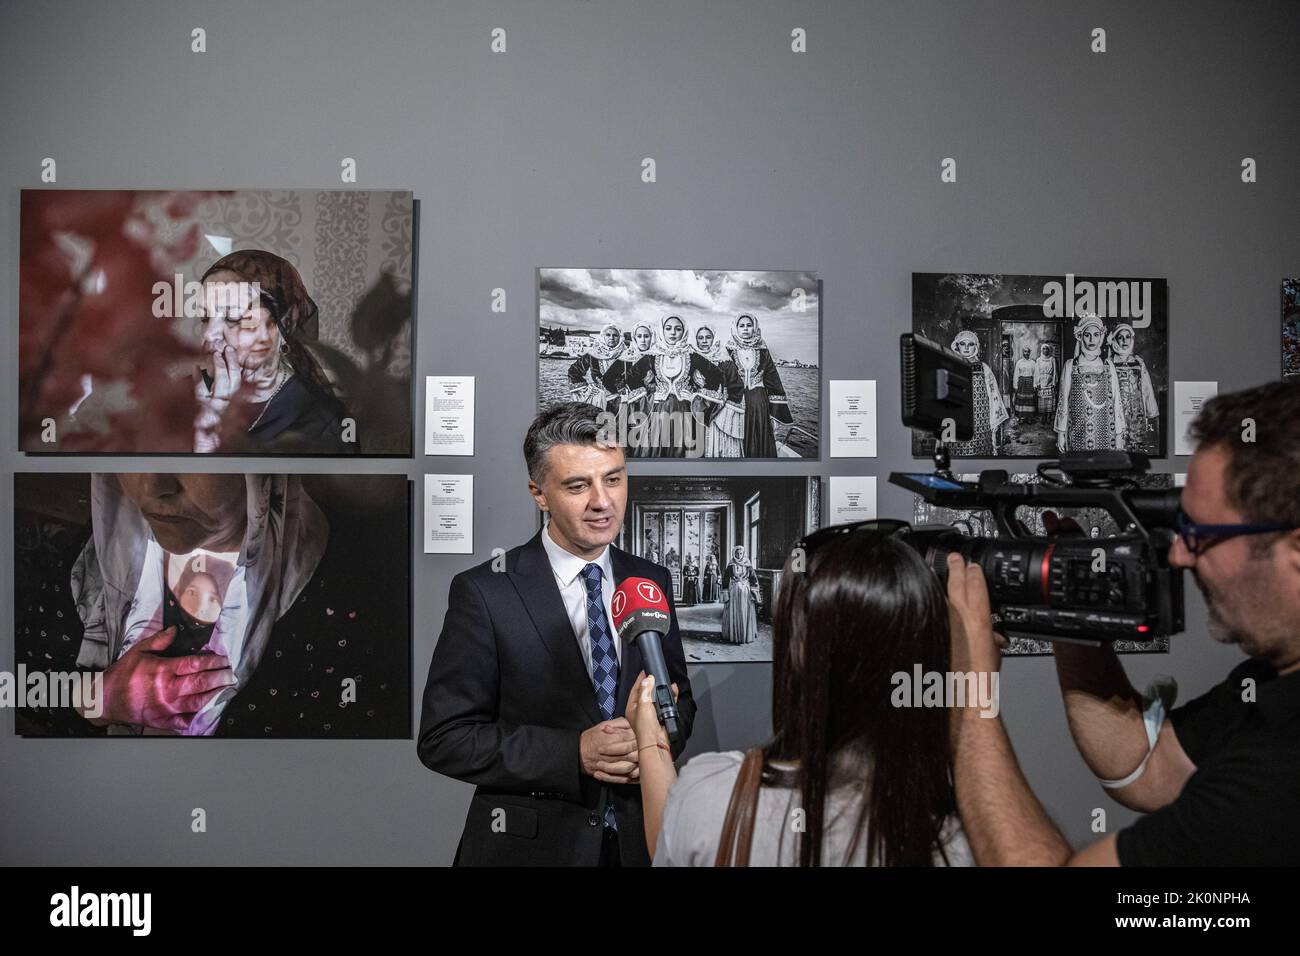 Istanbul, Turkey, 12/09/2022, Anadolu Agency Visual News Editor Firat Yurdakul made an evaluation about the exhibition. Istanbul Photo Awards 2022 Exhibition At Mimar Sinan Fine Arts University Tophane-i Amire Culture and Art Center, at the Single Dome building, with the participation of Anadolu Agency General Manager Serdar Karagoz, after the opening speech, Mimar Sinan Fine Arts University Rector Prof. Dr. Handan ?nci Elci opened with the presence of Beyoglu Mayor Haydar Ali Yildiz and guests. Award-winning photographs will be open to visitors until the end of September. Stock Photo